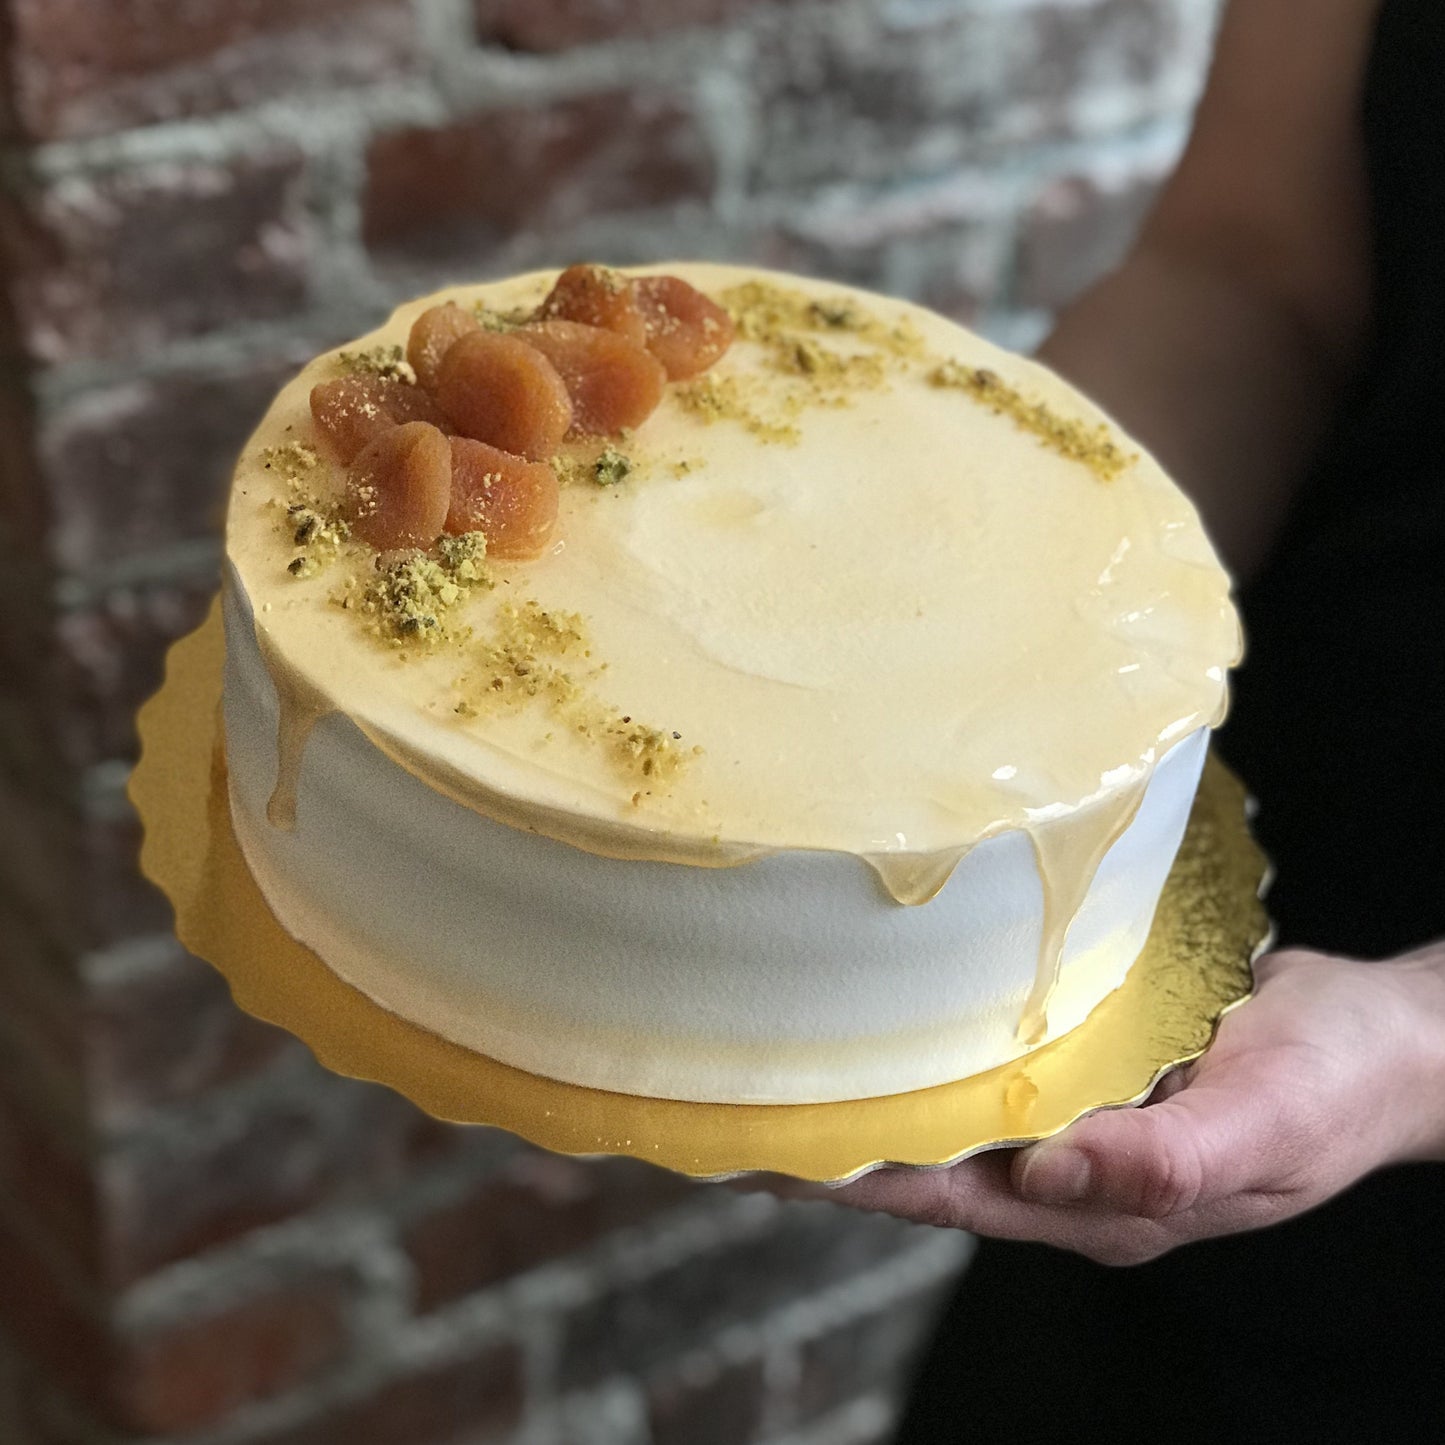 Pistachio and limoncello cream cake with dried apricots on top